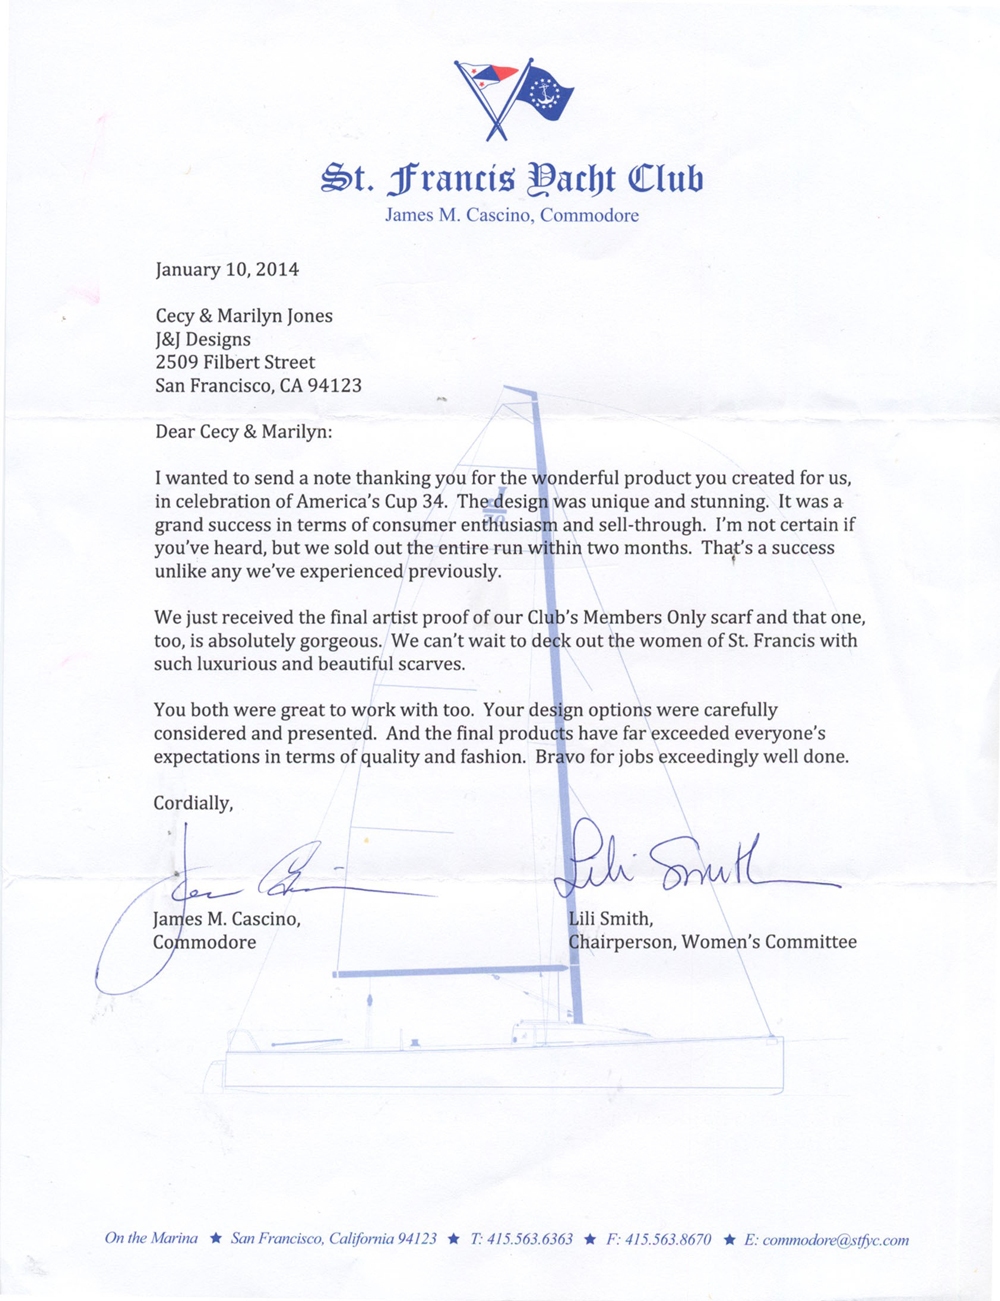 sfyc letter 2.